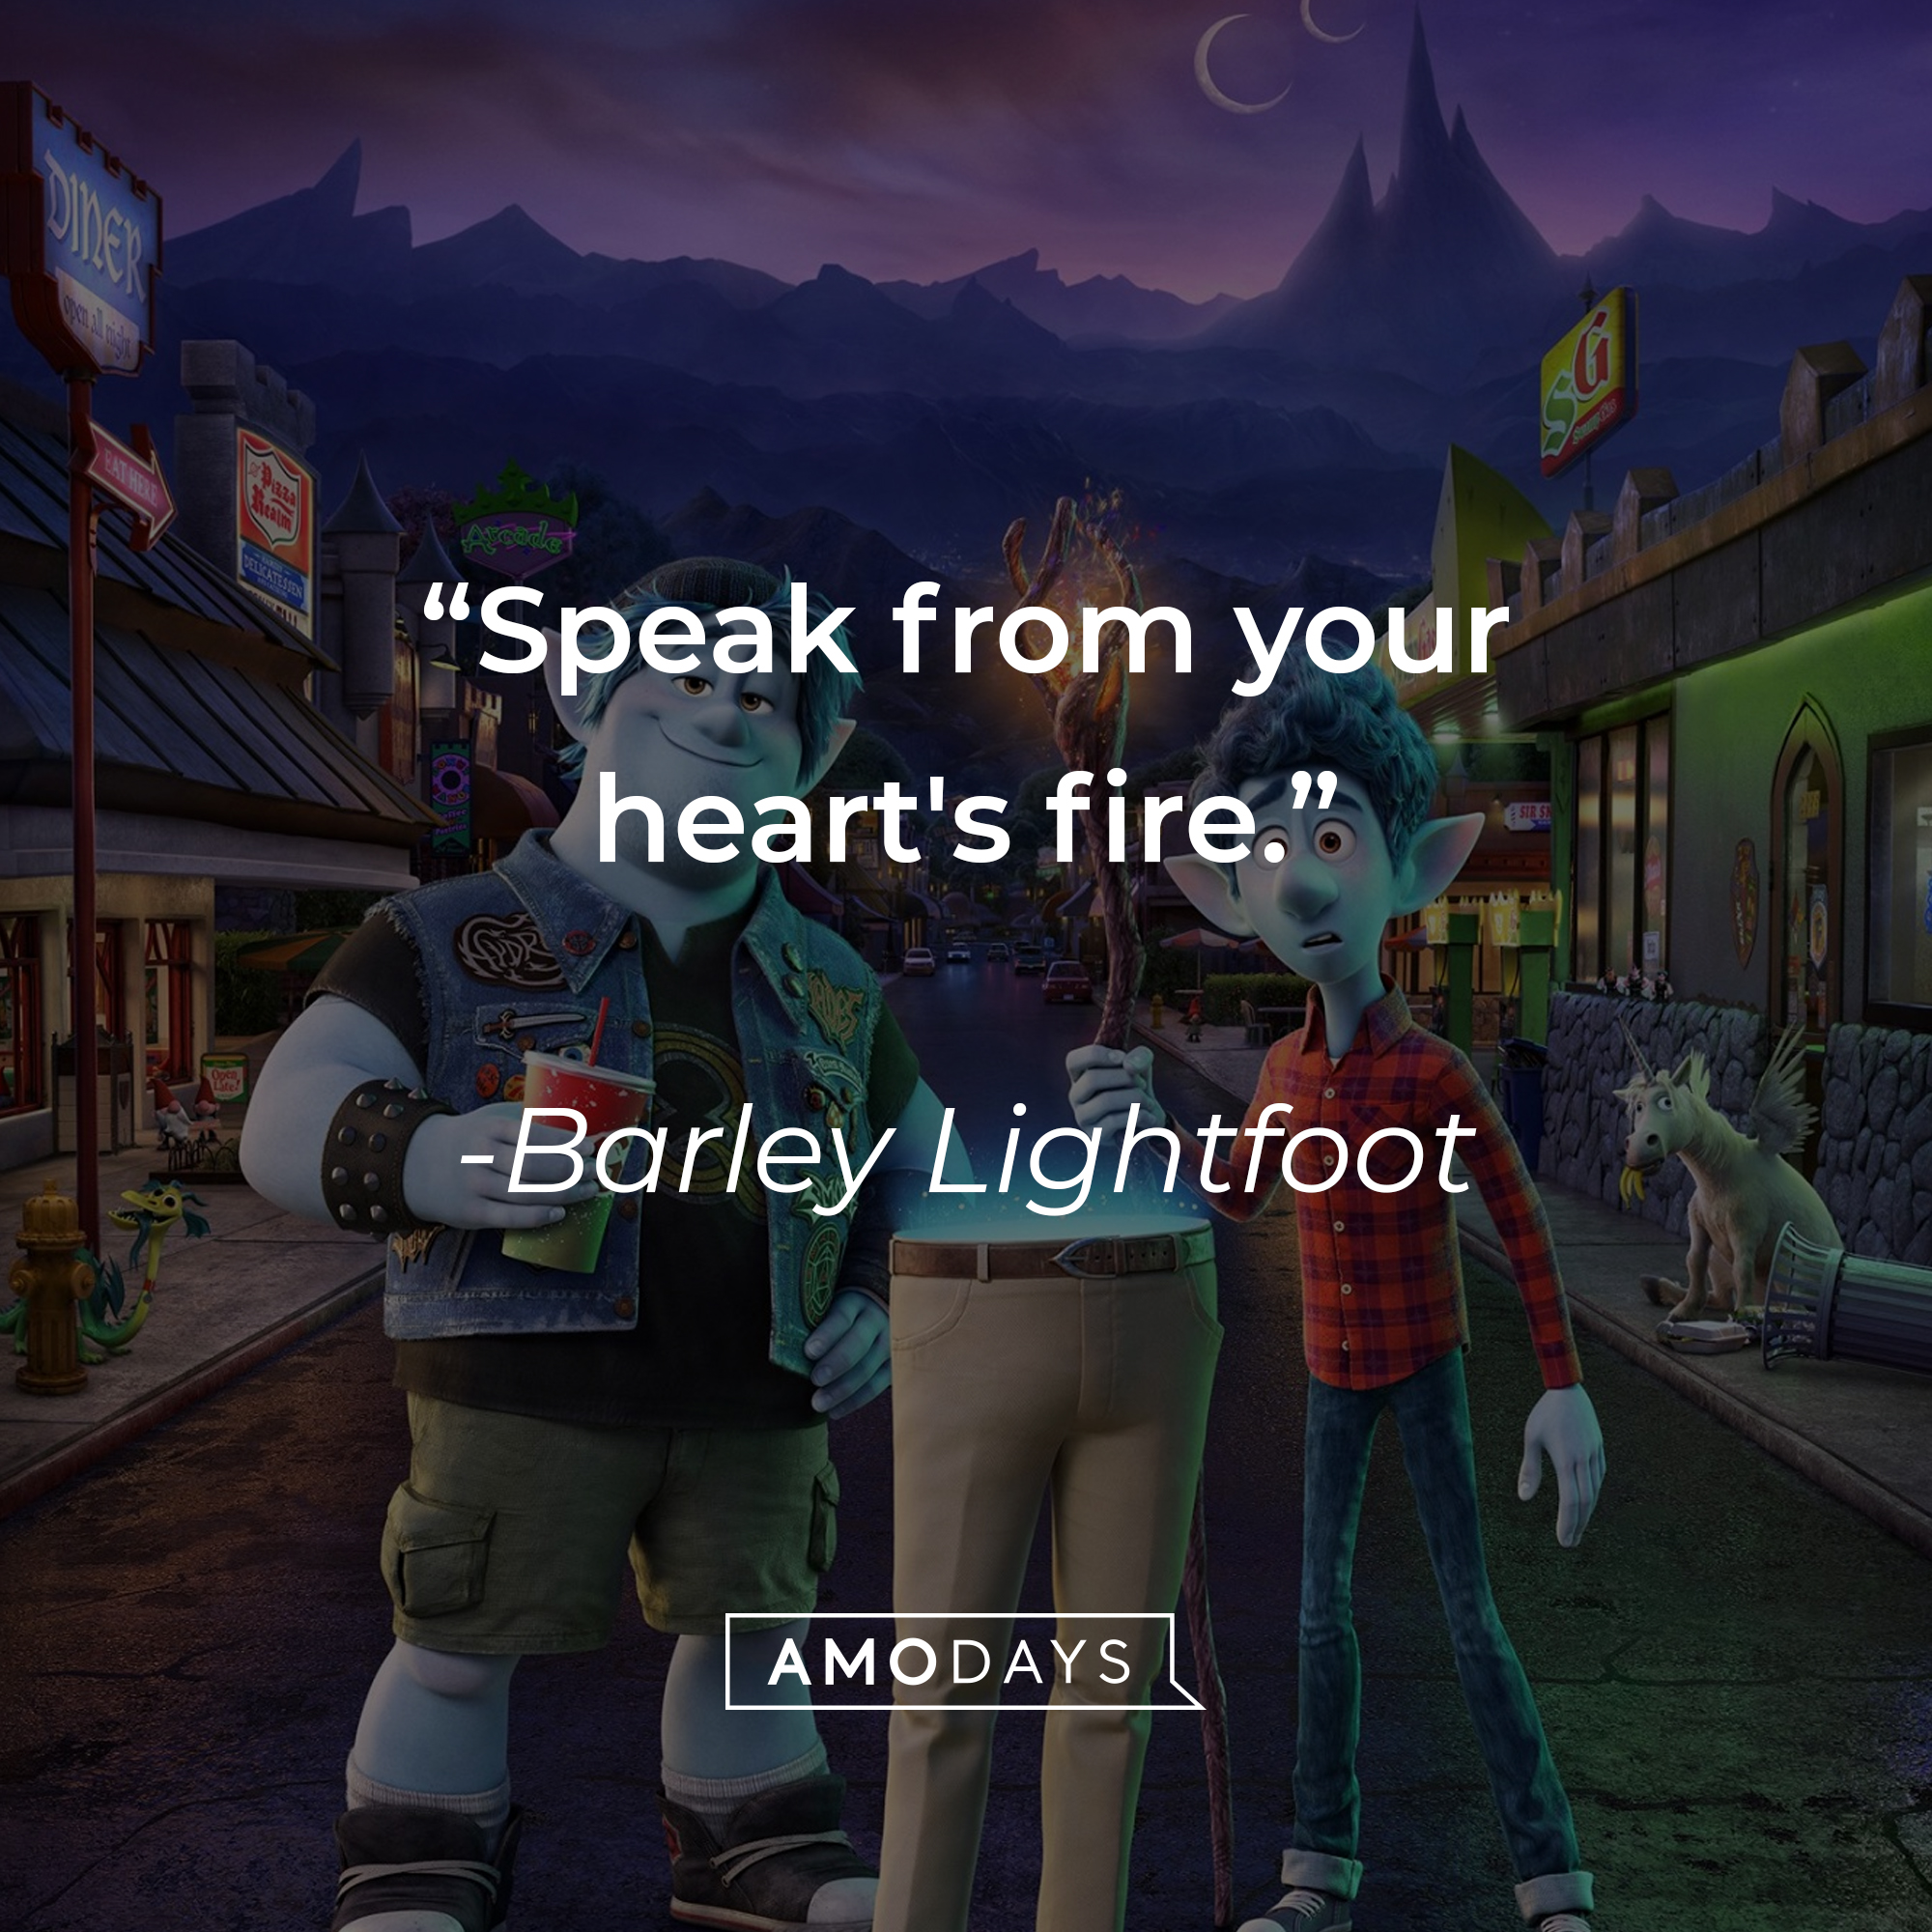 A still from Disney's "Onward" with Barley Lightfoot's quote: "Speak from your heart's fire." | Source: facebook.com/pixaronward